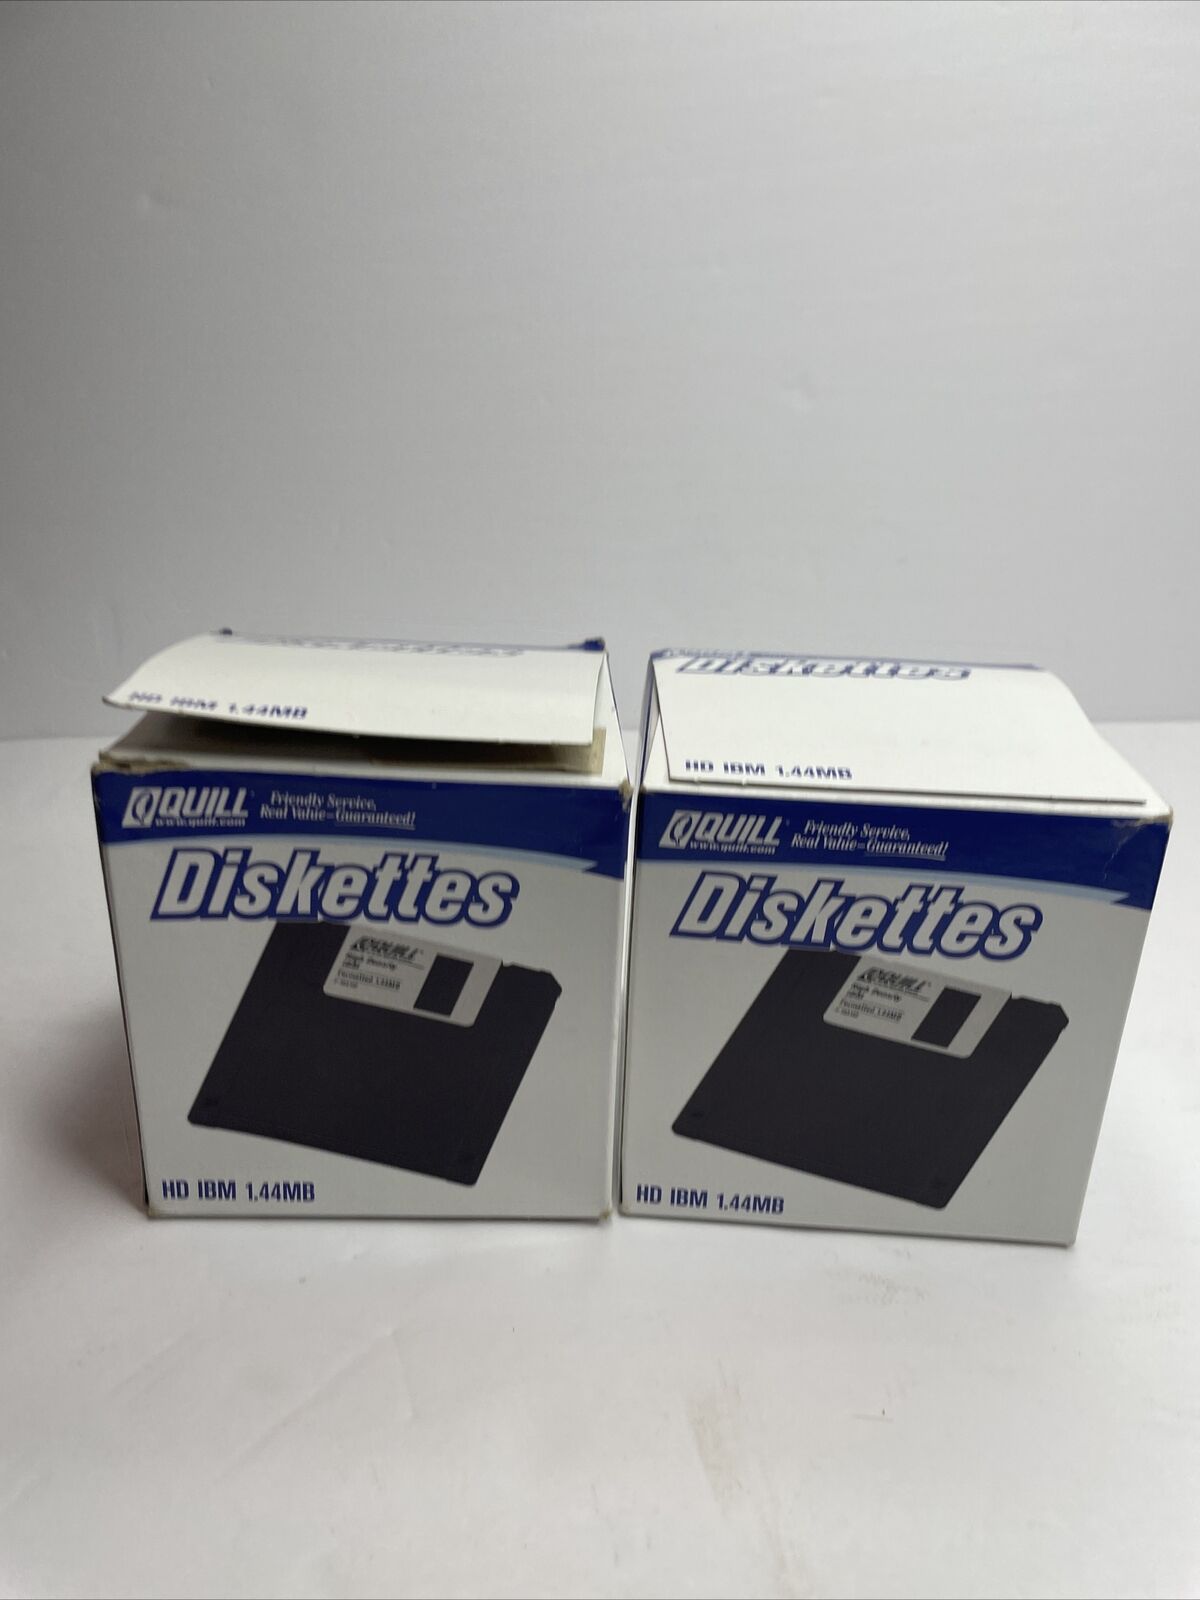 48 Quill HD 1.44 MB 3.5” Diskettes IBM Formatted - NEW/SEALED